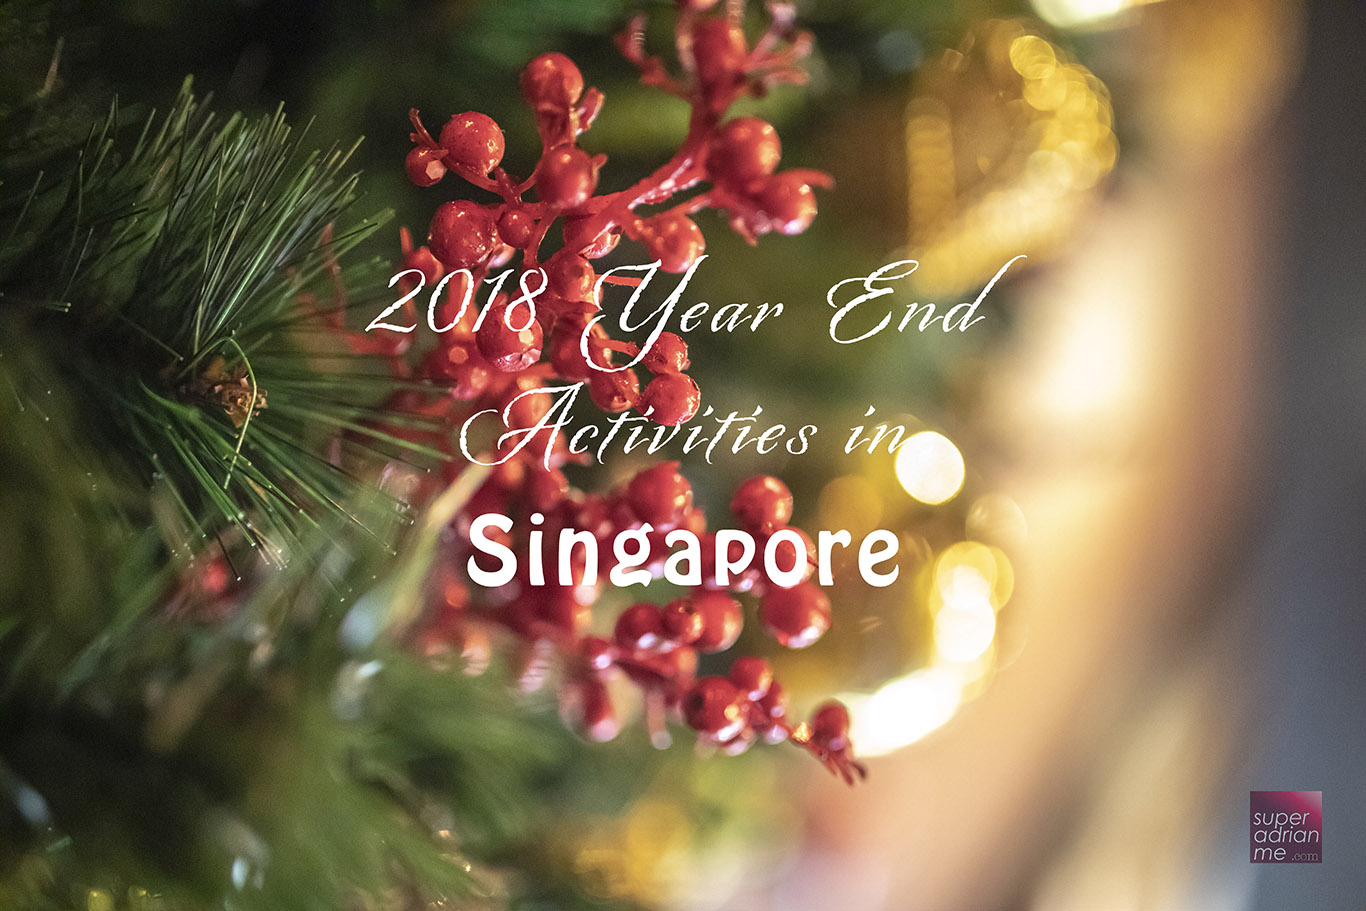 2018 Year End Activities in Singapore